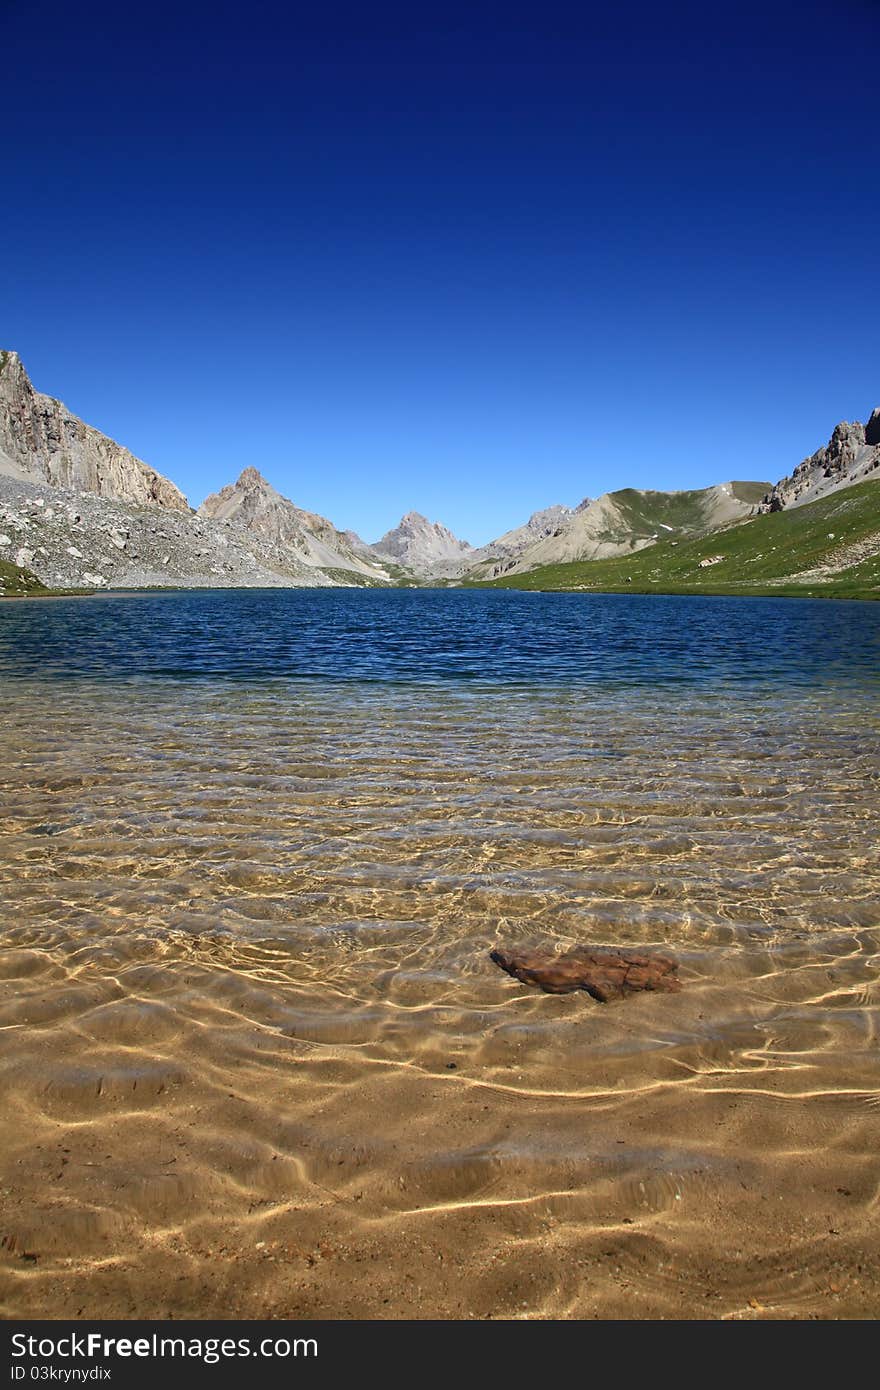 Translucent lake of mountain with some sand and a rock in foreground. Translucent lake of mountain with some sand and a rock in foreground.